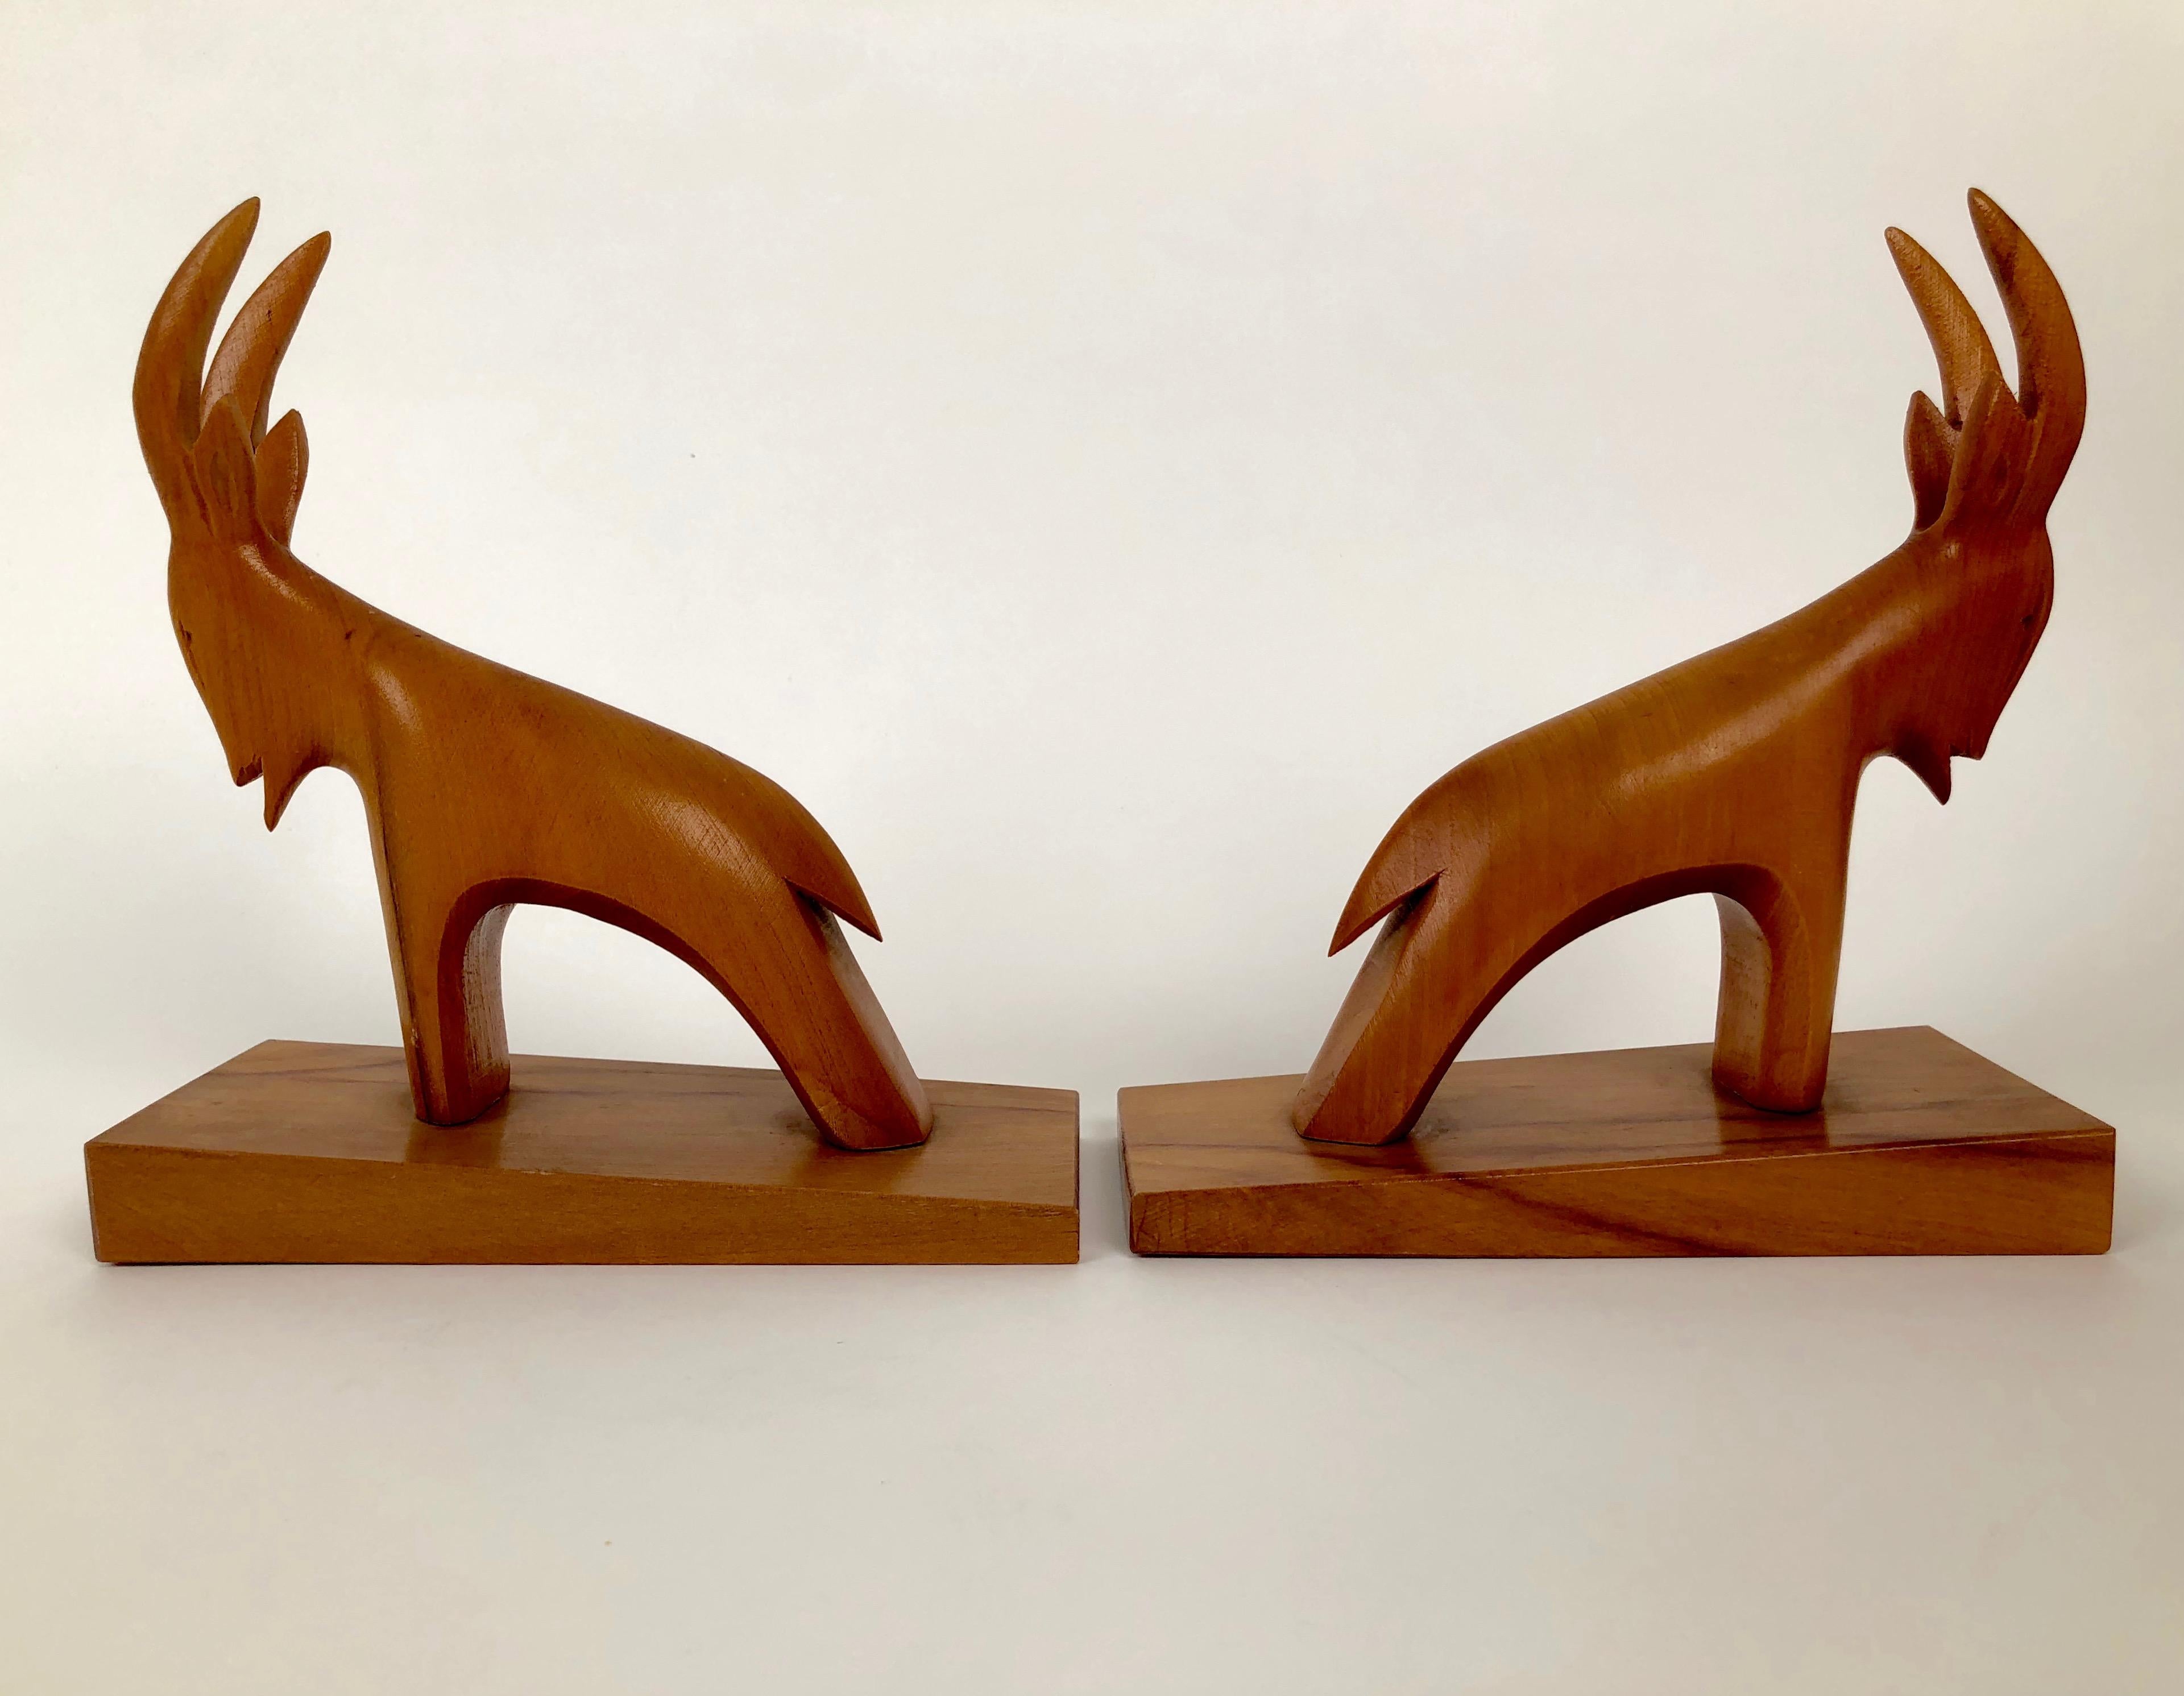 A wonderful pair of midcentury Stein Böcks from Austria. Beautiful, simplified abstract forms carved in cherrywood. Both pieces are almost
exact copies of each other. The artist is unknown, but he has left us with two precious objects that will